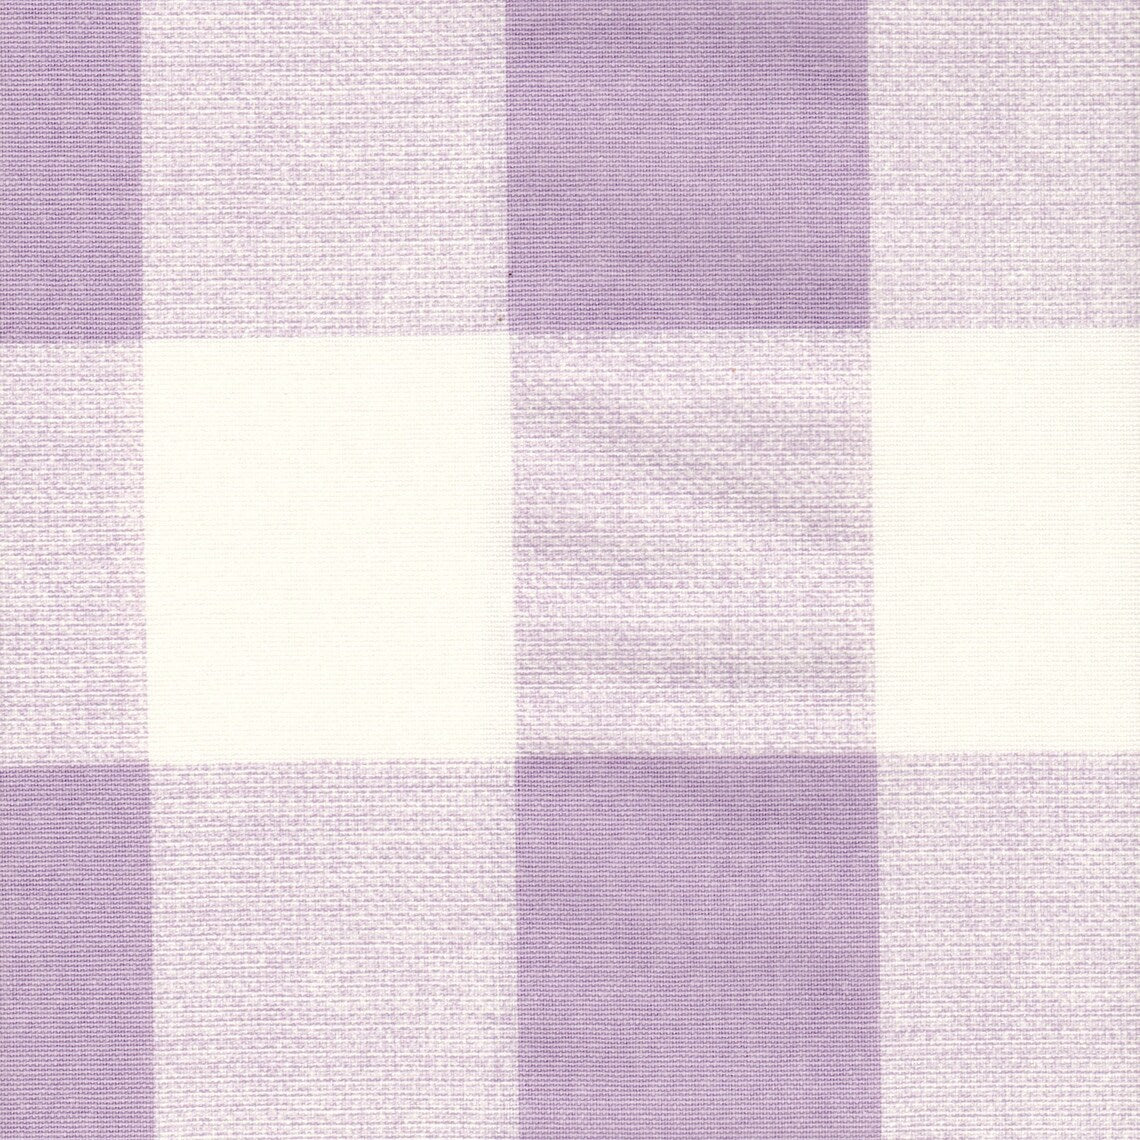 Tailored Bedskirt in Anderson Orchid Lavender Buffalo Check Plaid